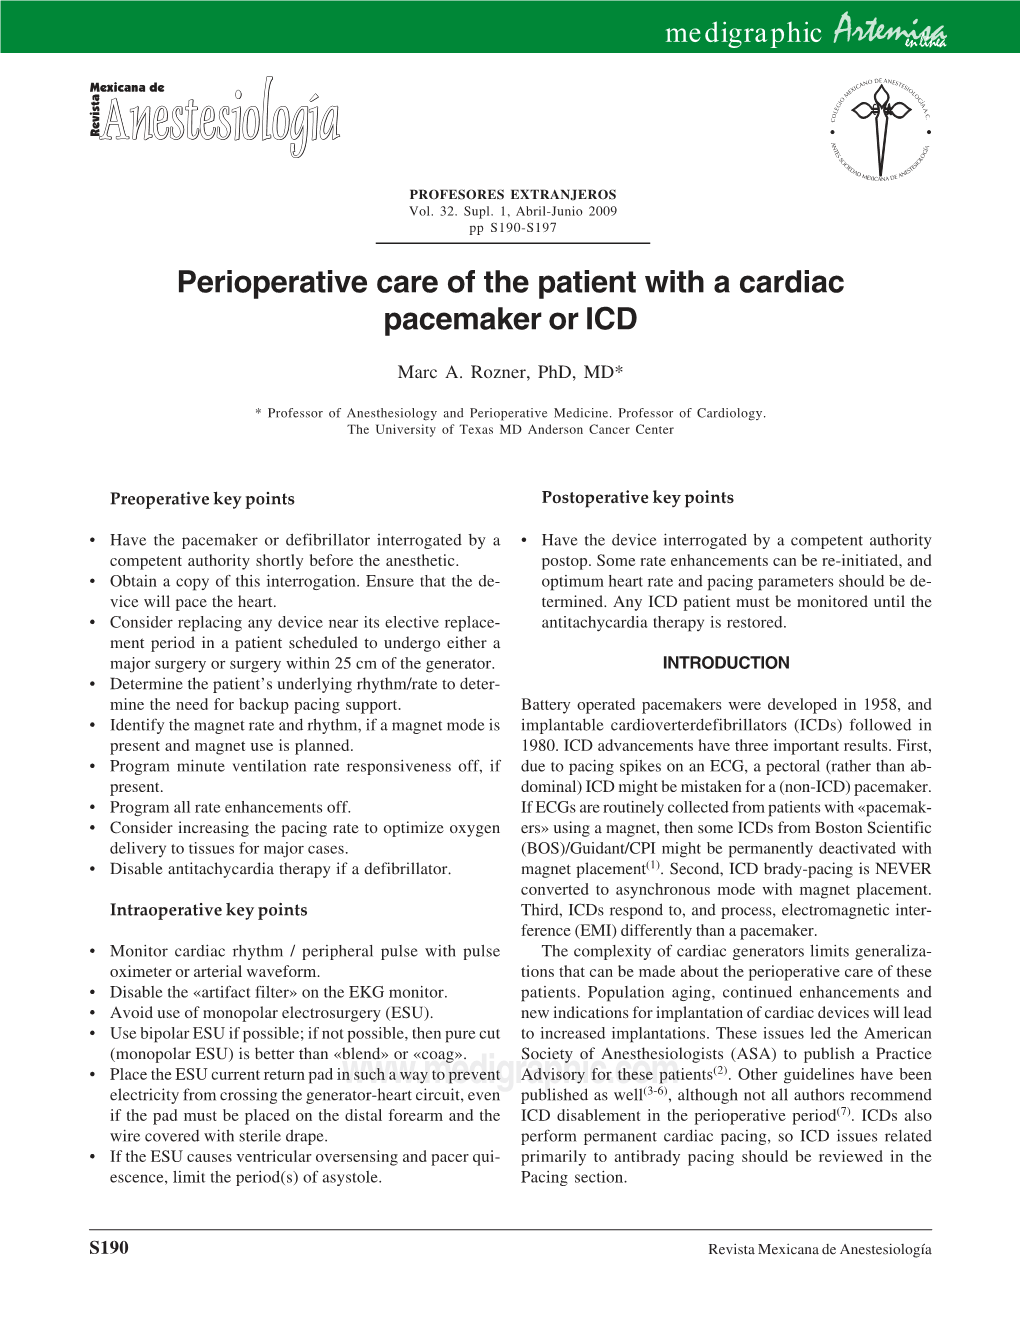 Perioperative Care of the Patient with a Cardiac Pacemaker Or ICD